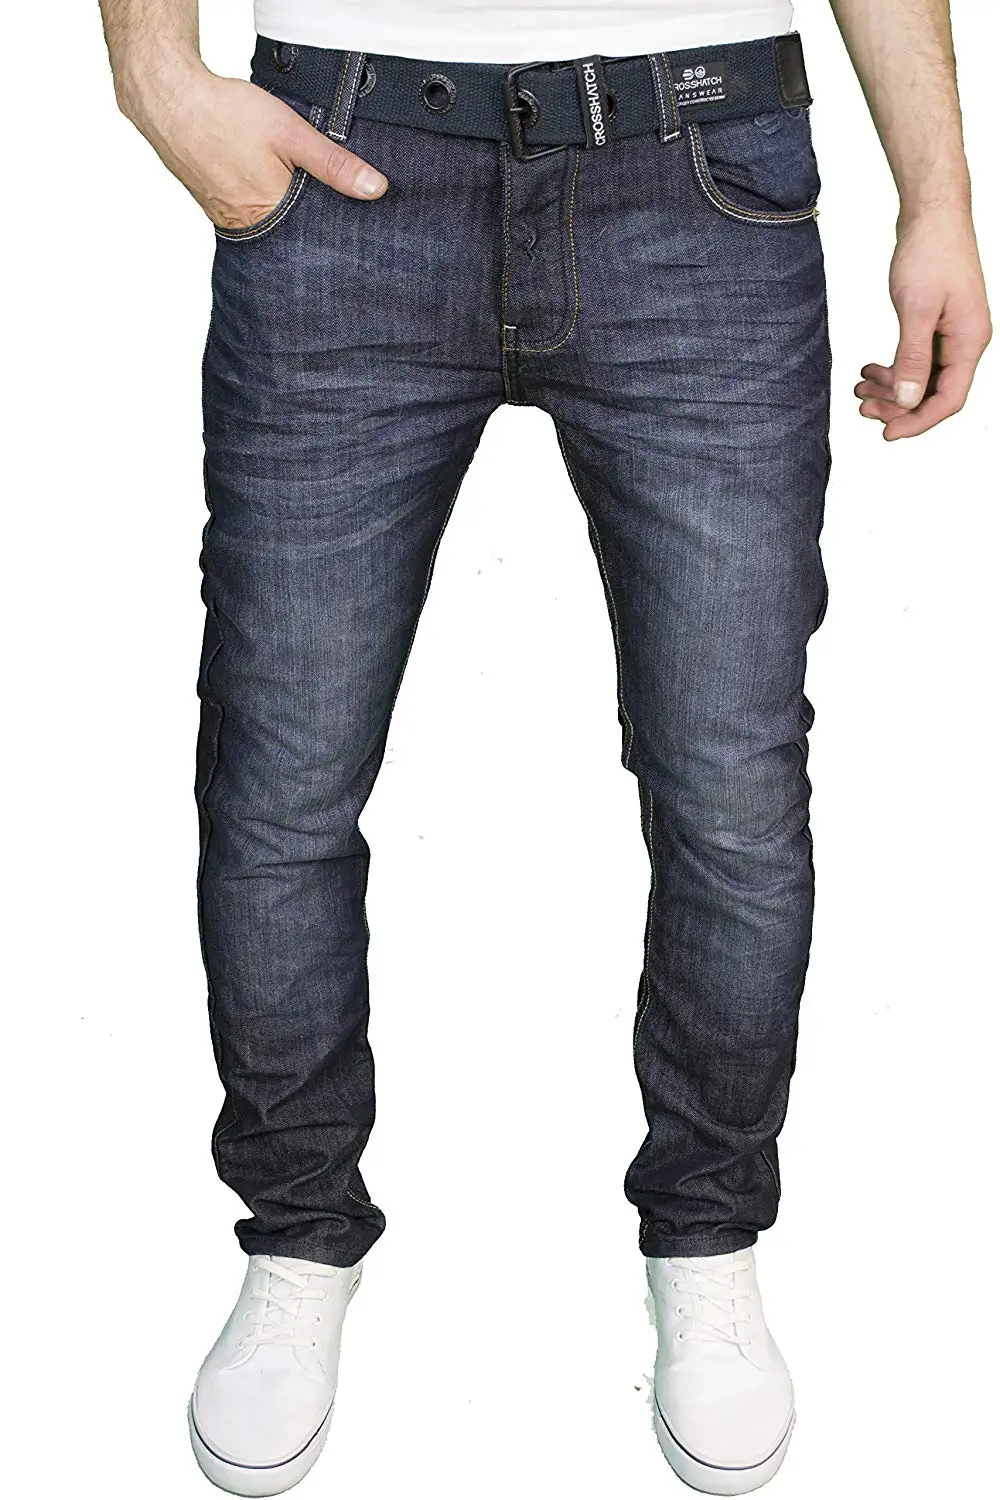 Cheap Crosshatch 55 Jeans, find Crosshatch 55 Jeans deals on line at ...